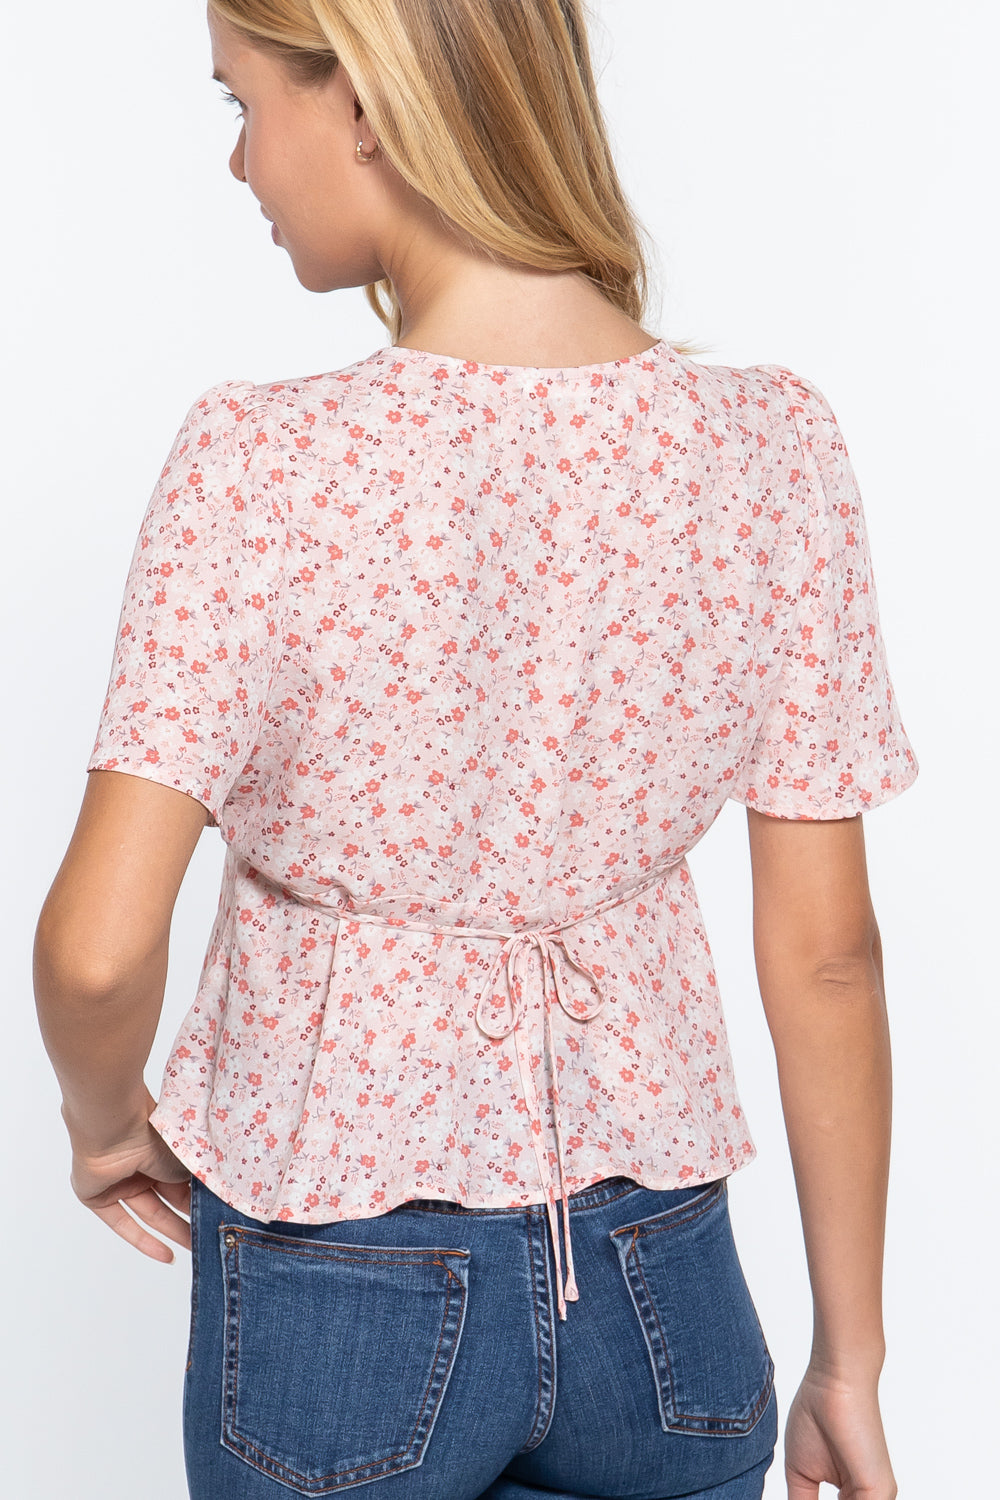 Ruffle Sleeve with Back Tie Print Woven Top in Blush